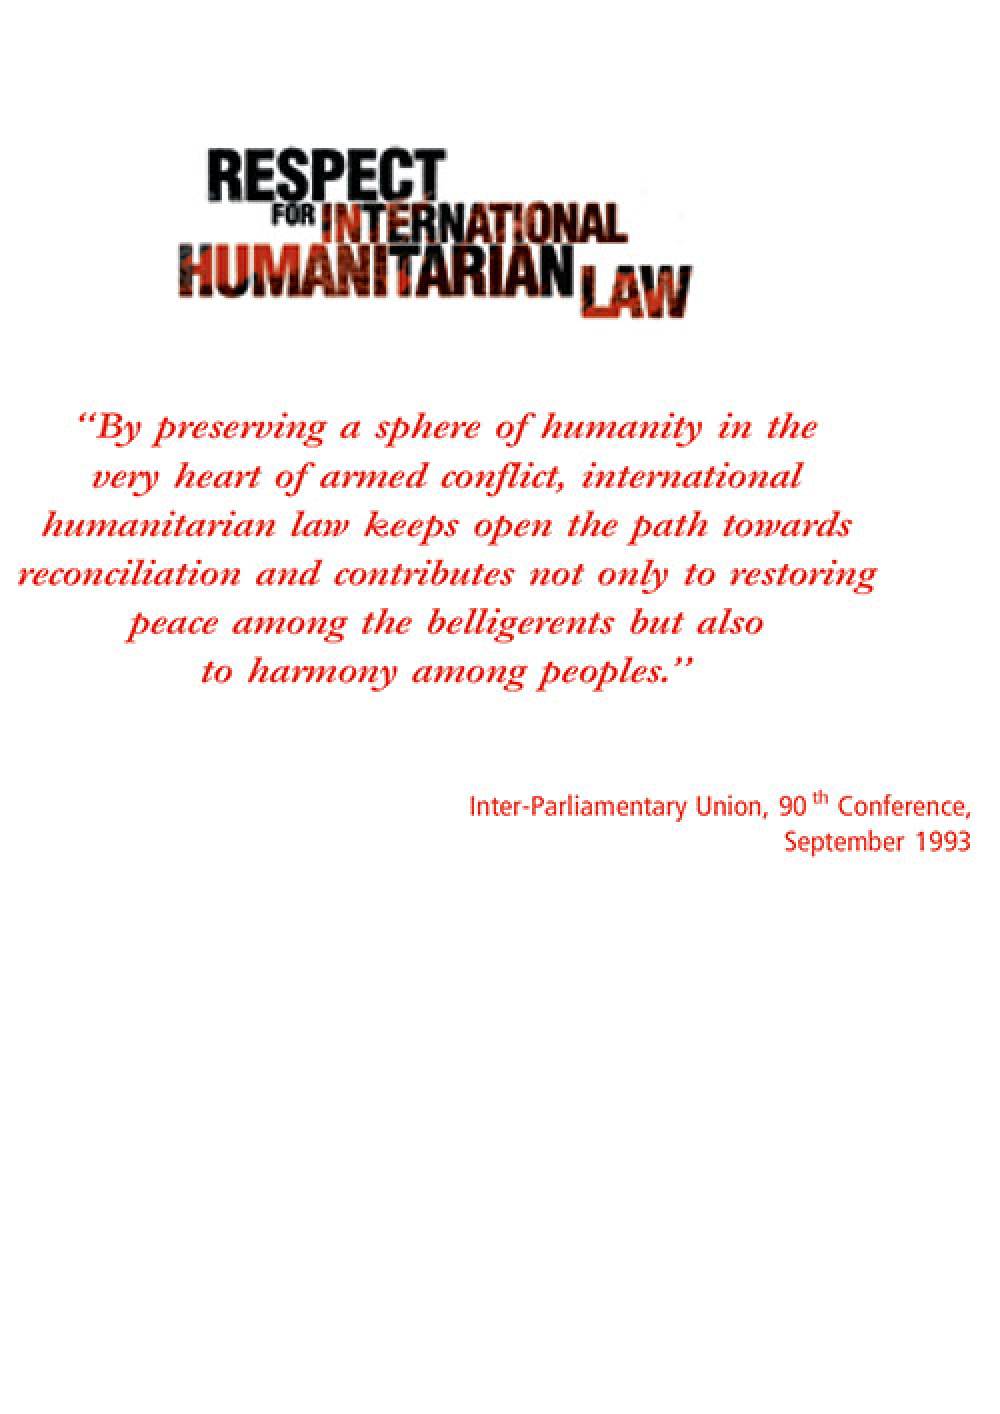 Respect for International Humanitarian Law